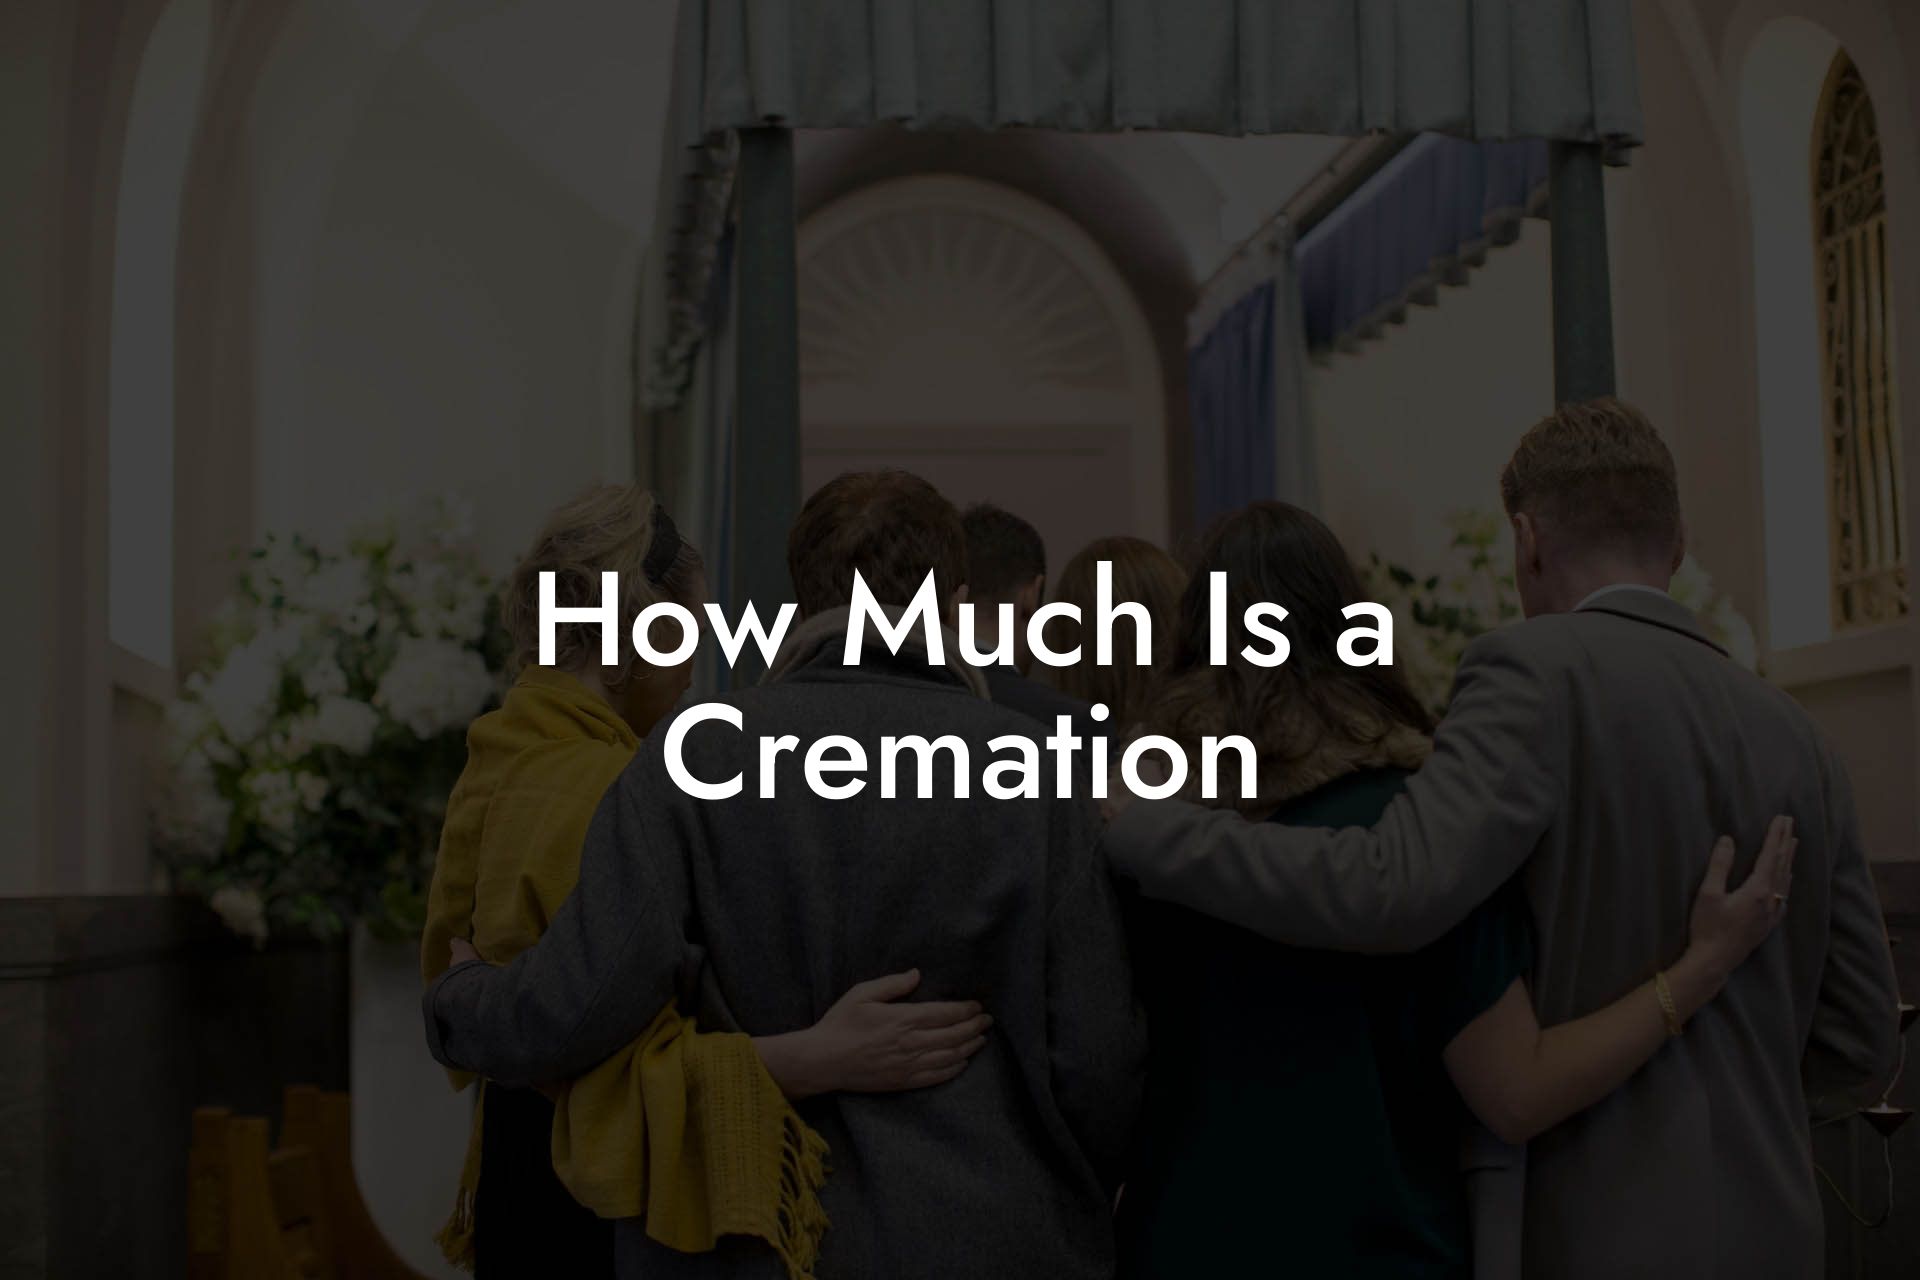 How Much Is a Cremation